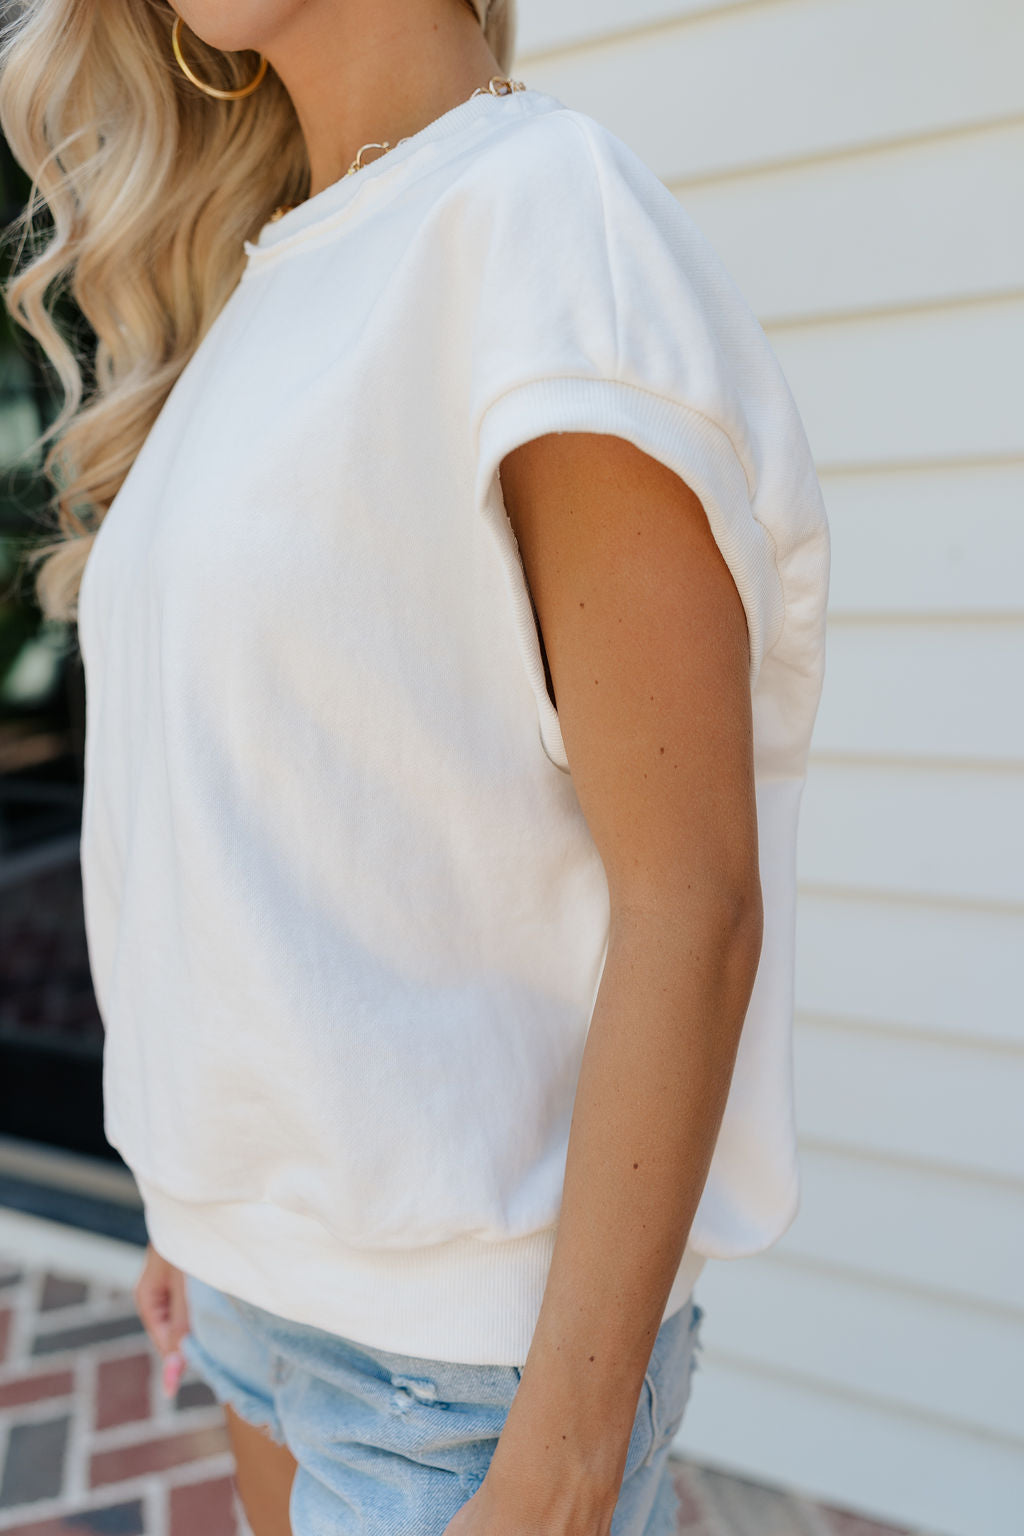 Close up side view of female model wearing the Ivy Cream Sleeveless Top which features White Cotton Fabric, Raw Thread Hem Details, Sleeveless andRound Neckline.